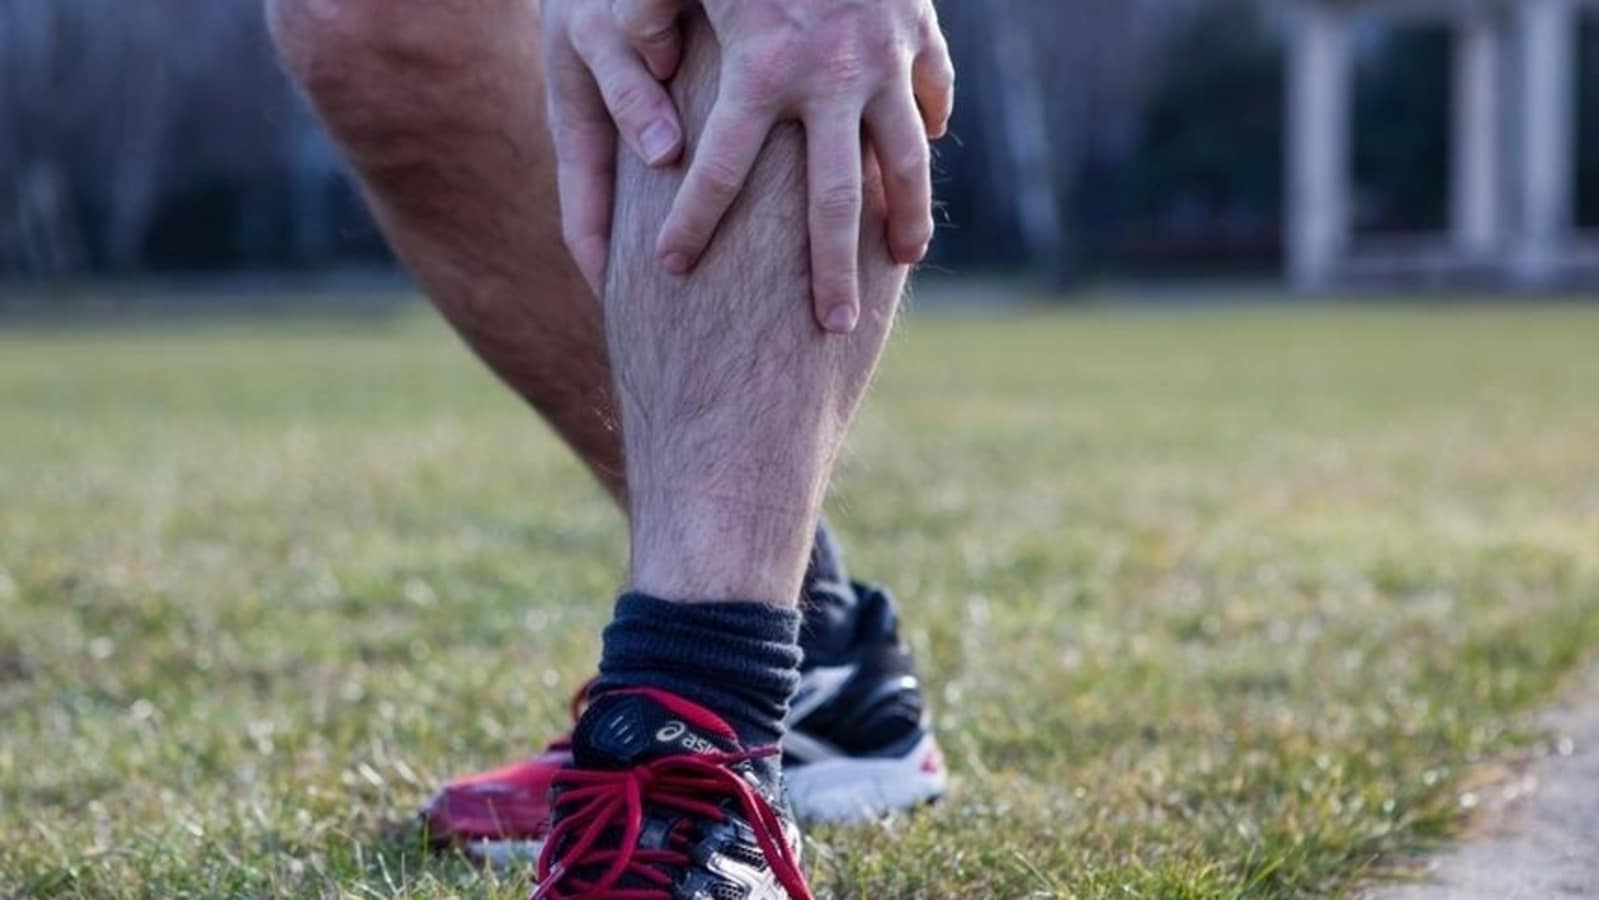 Stress fractures in sport: when stressed bones fight back